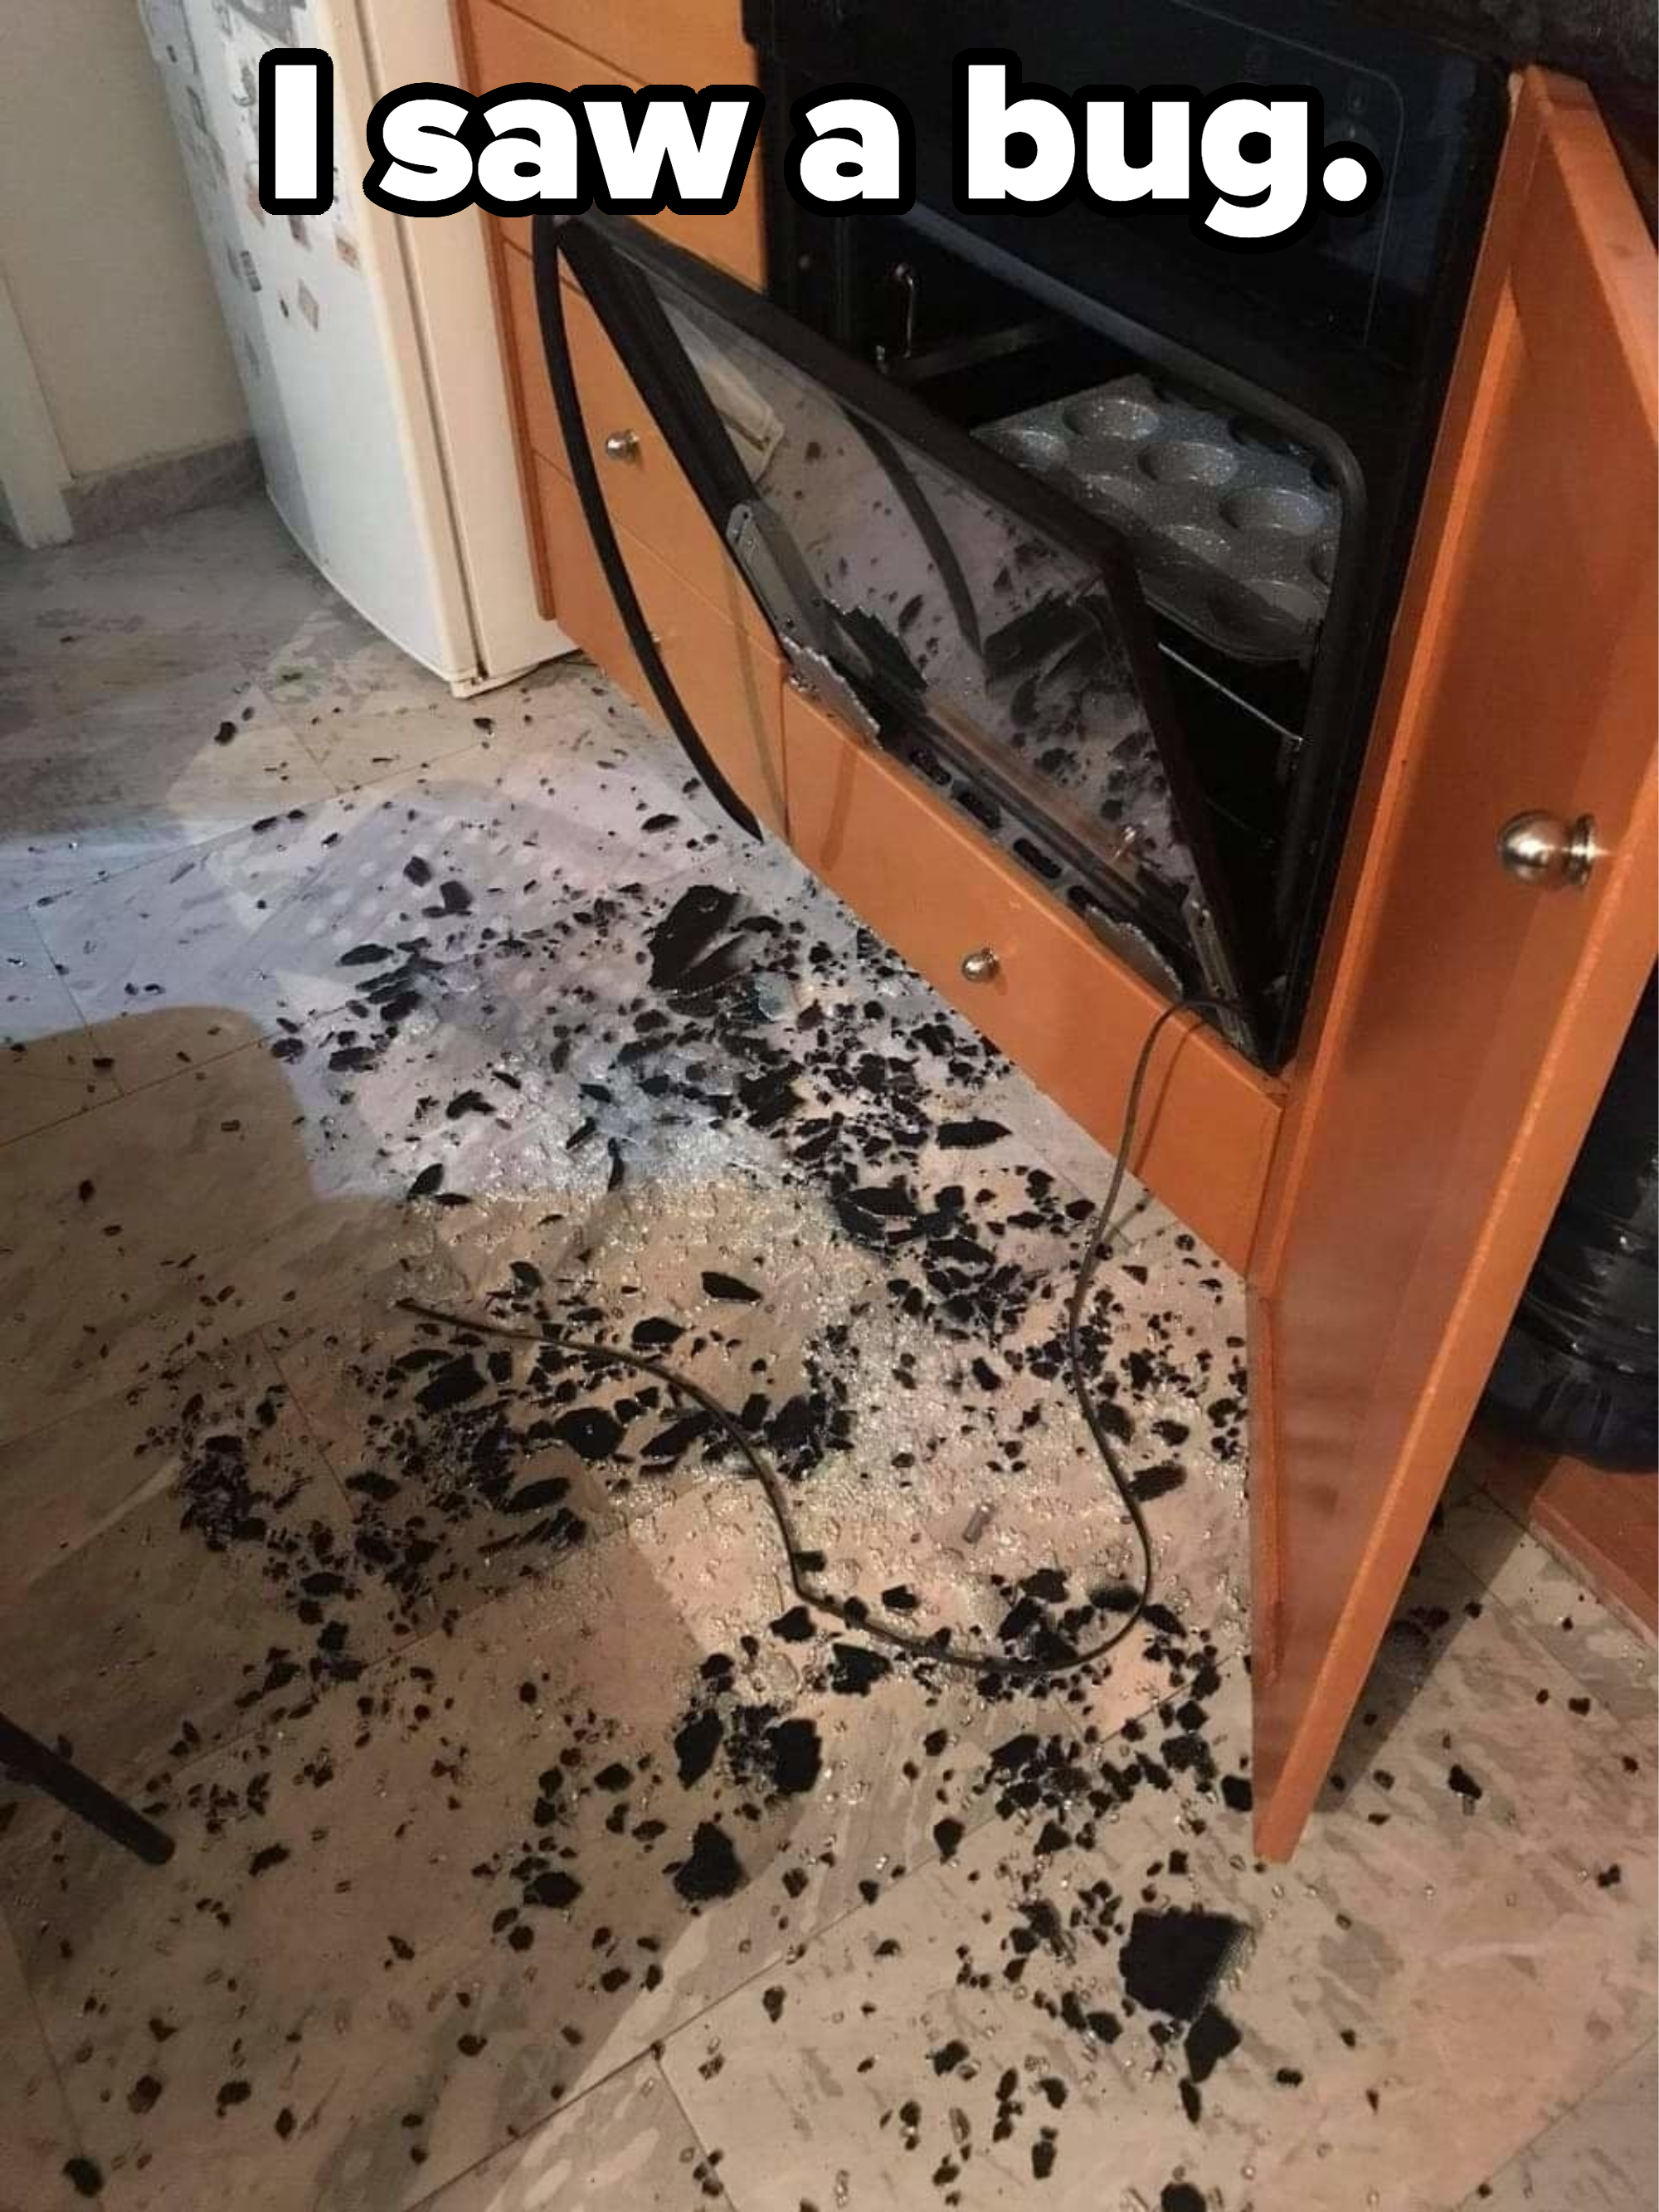 An oven door is open with shattered glass on the floor